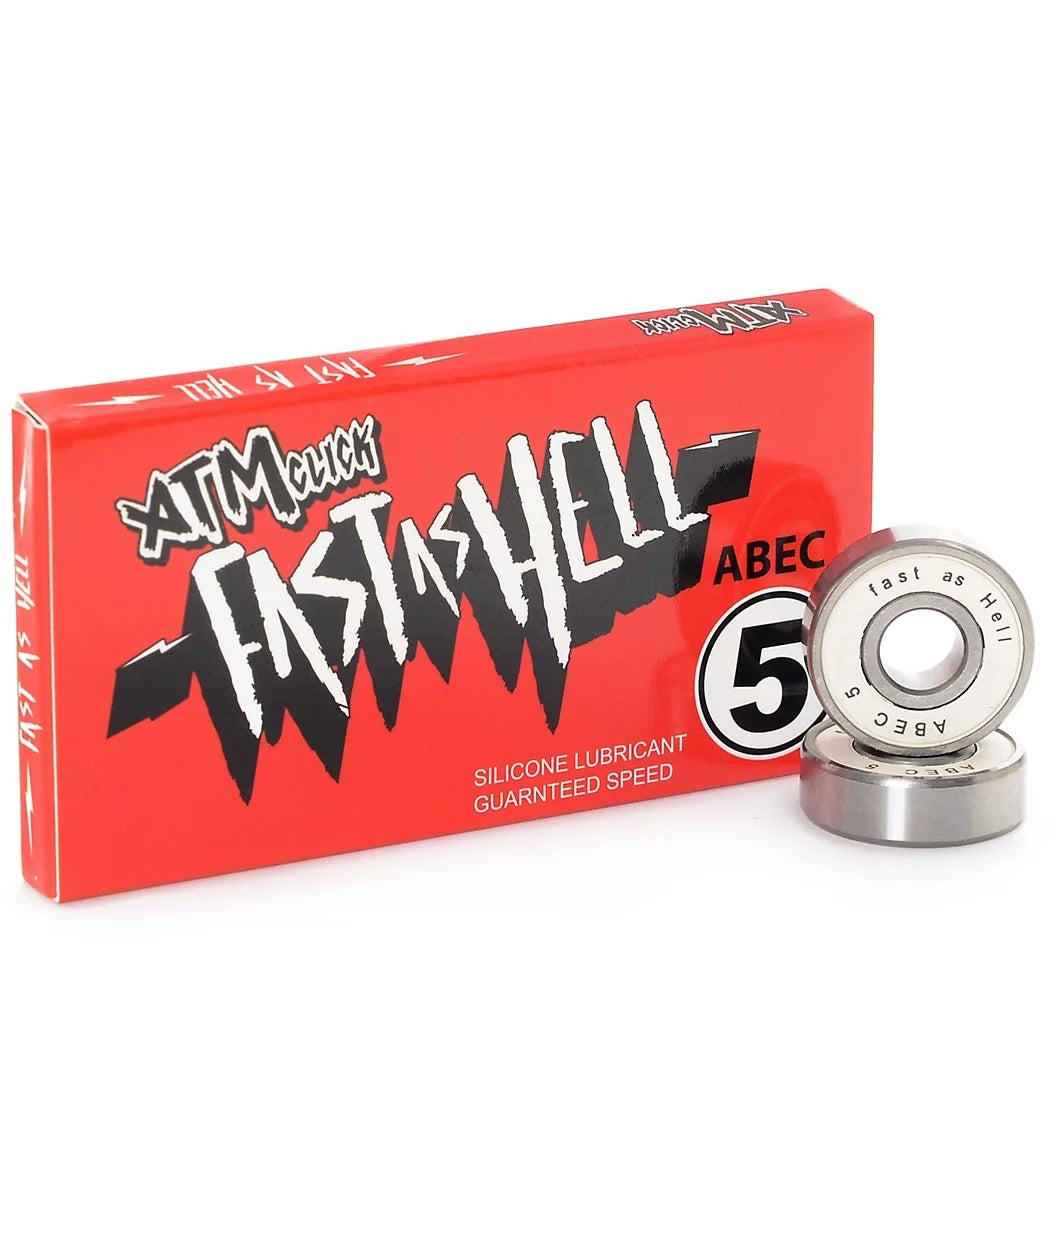 ATM Fast as Hell Bearings - ABEC-5